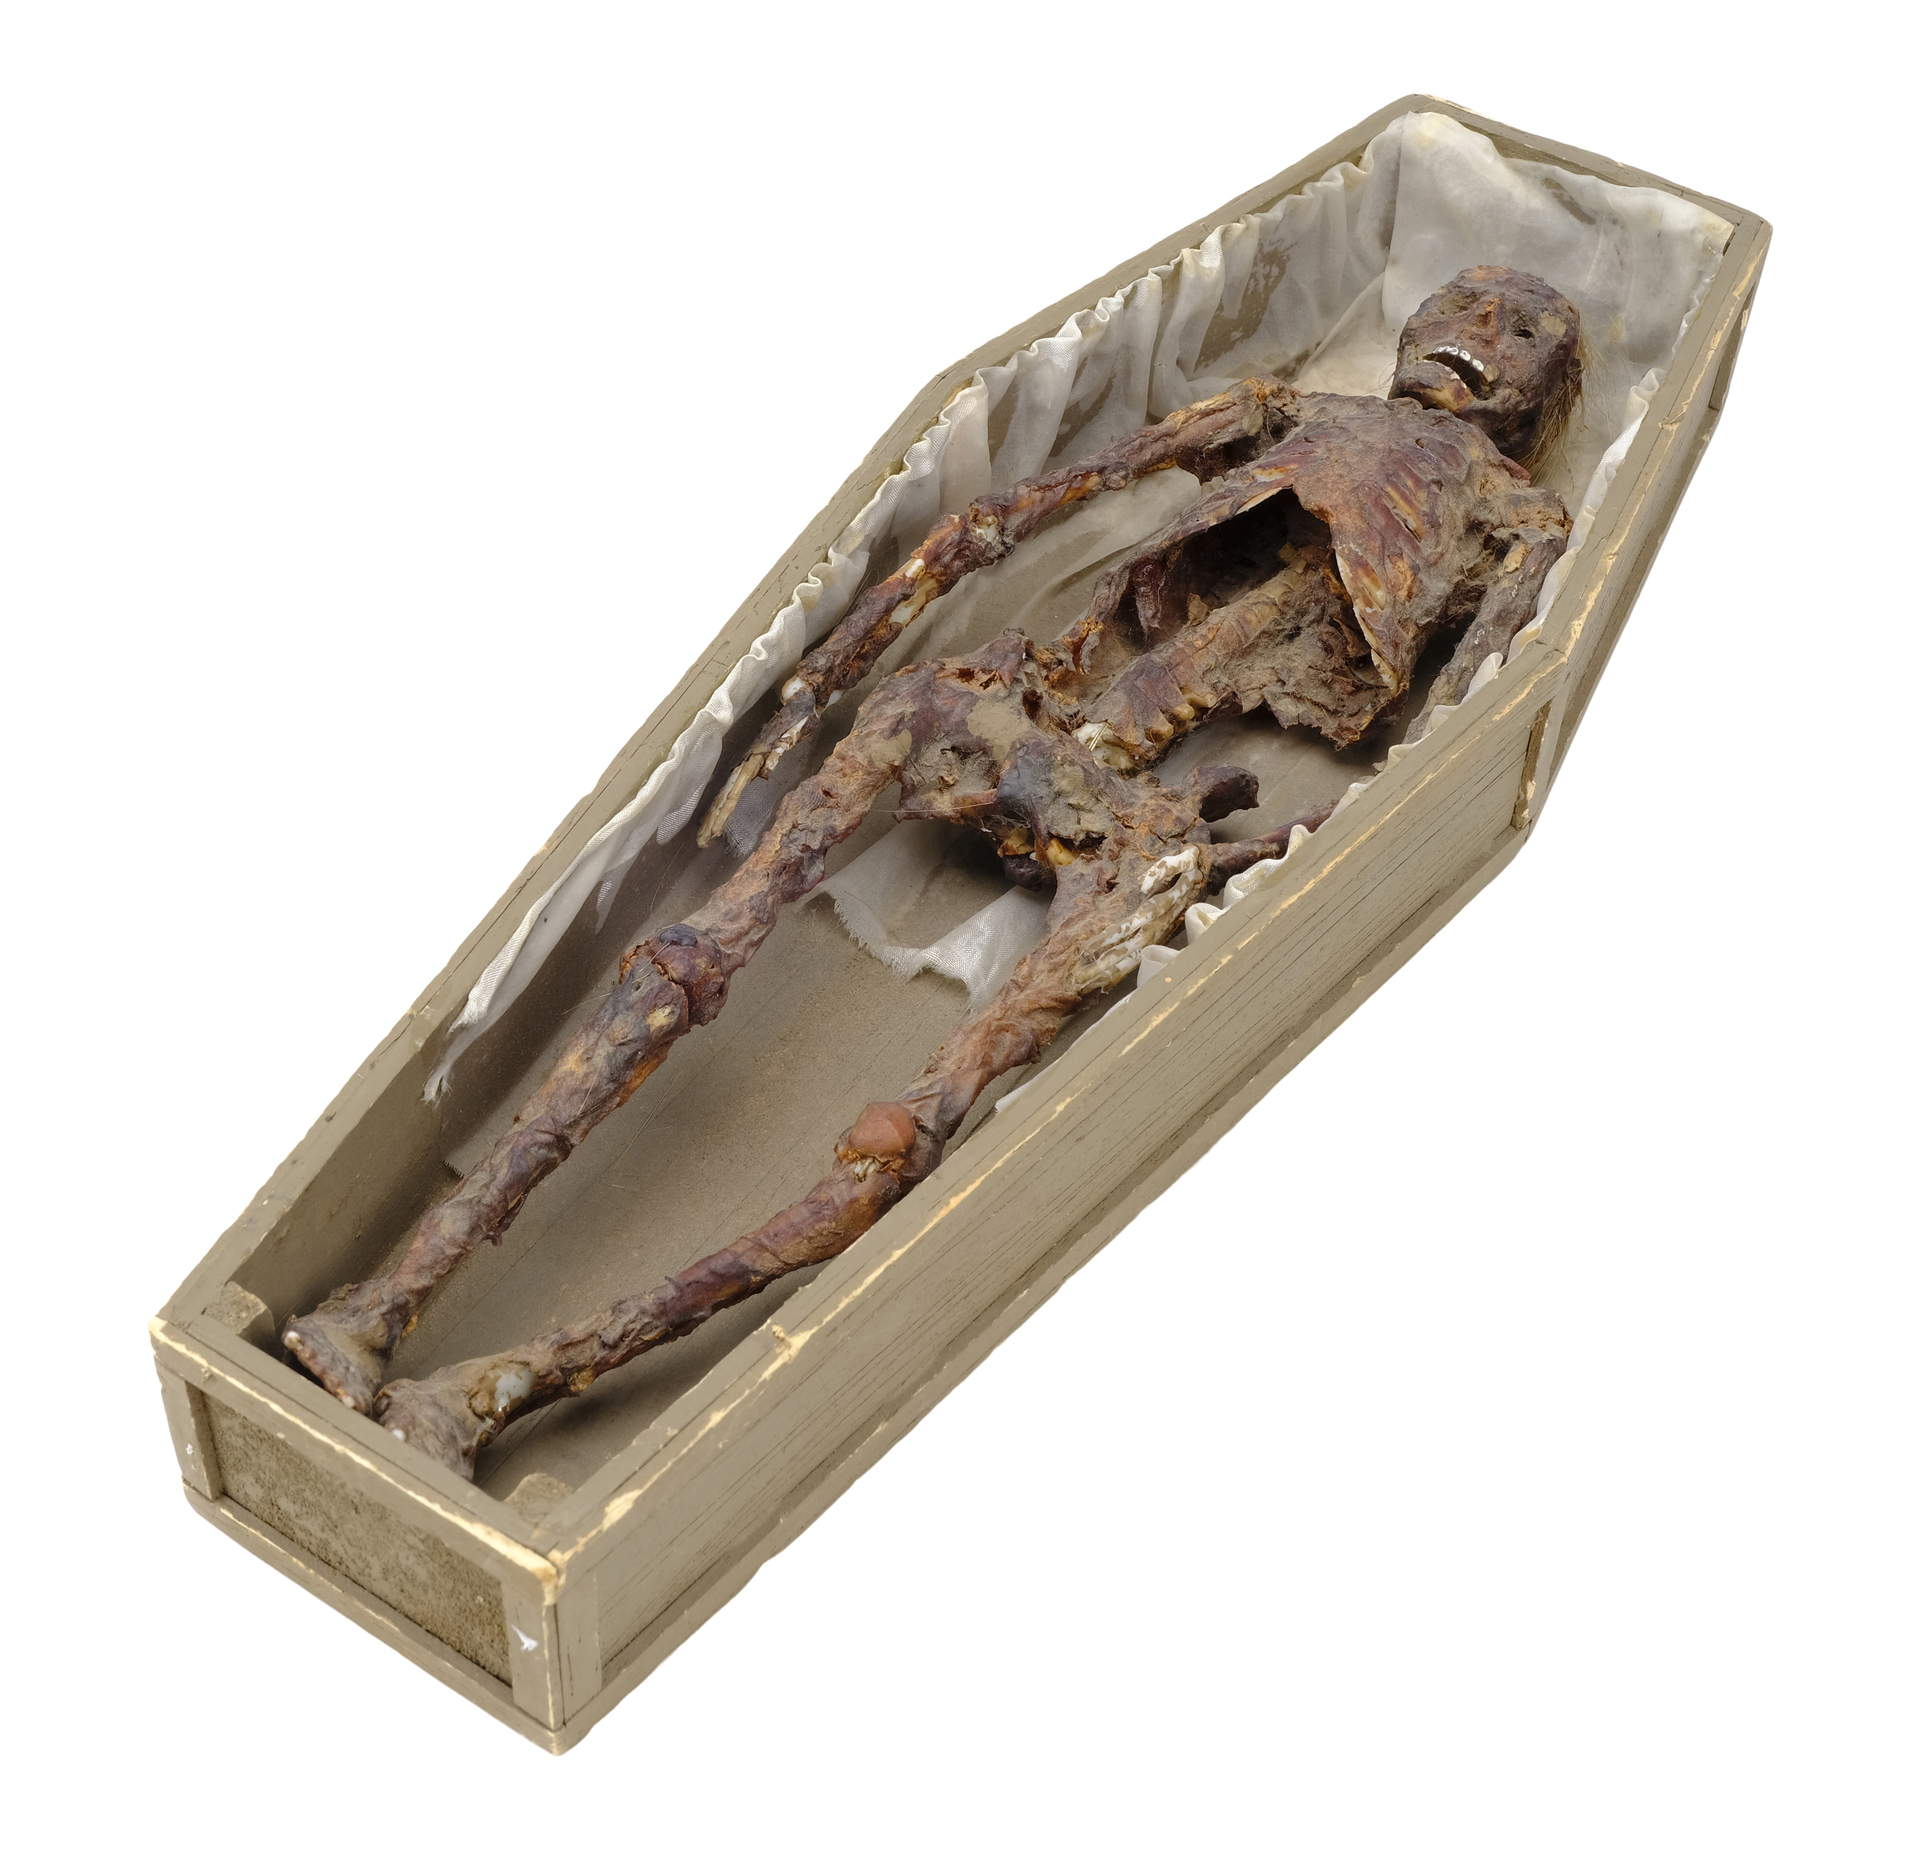 POLTERGEIST (1982) - Desiccated Corpse in Coffin Model Miniature - Image 2 of 7